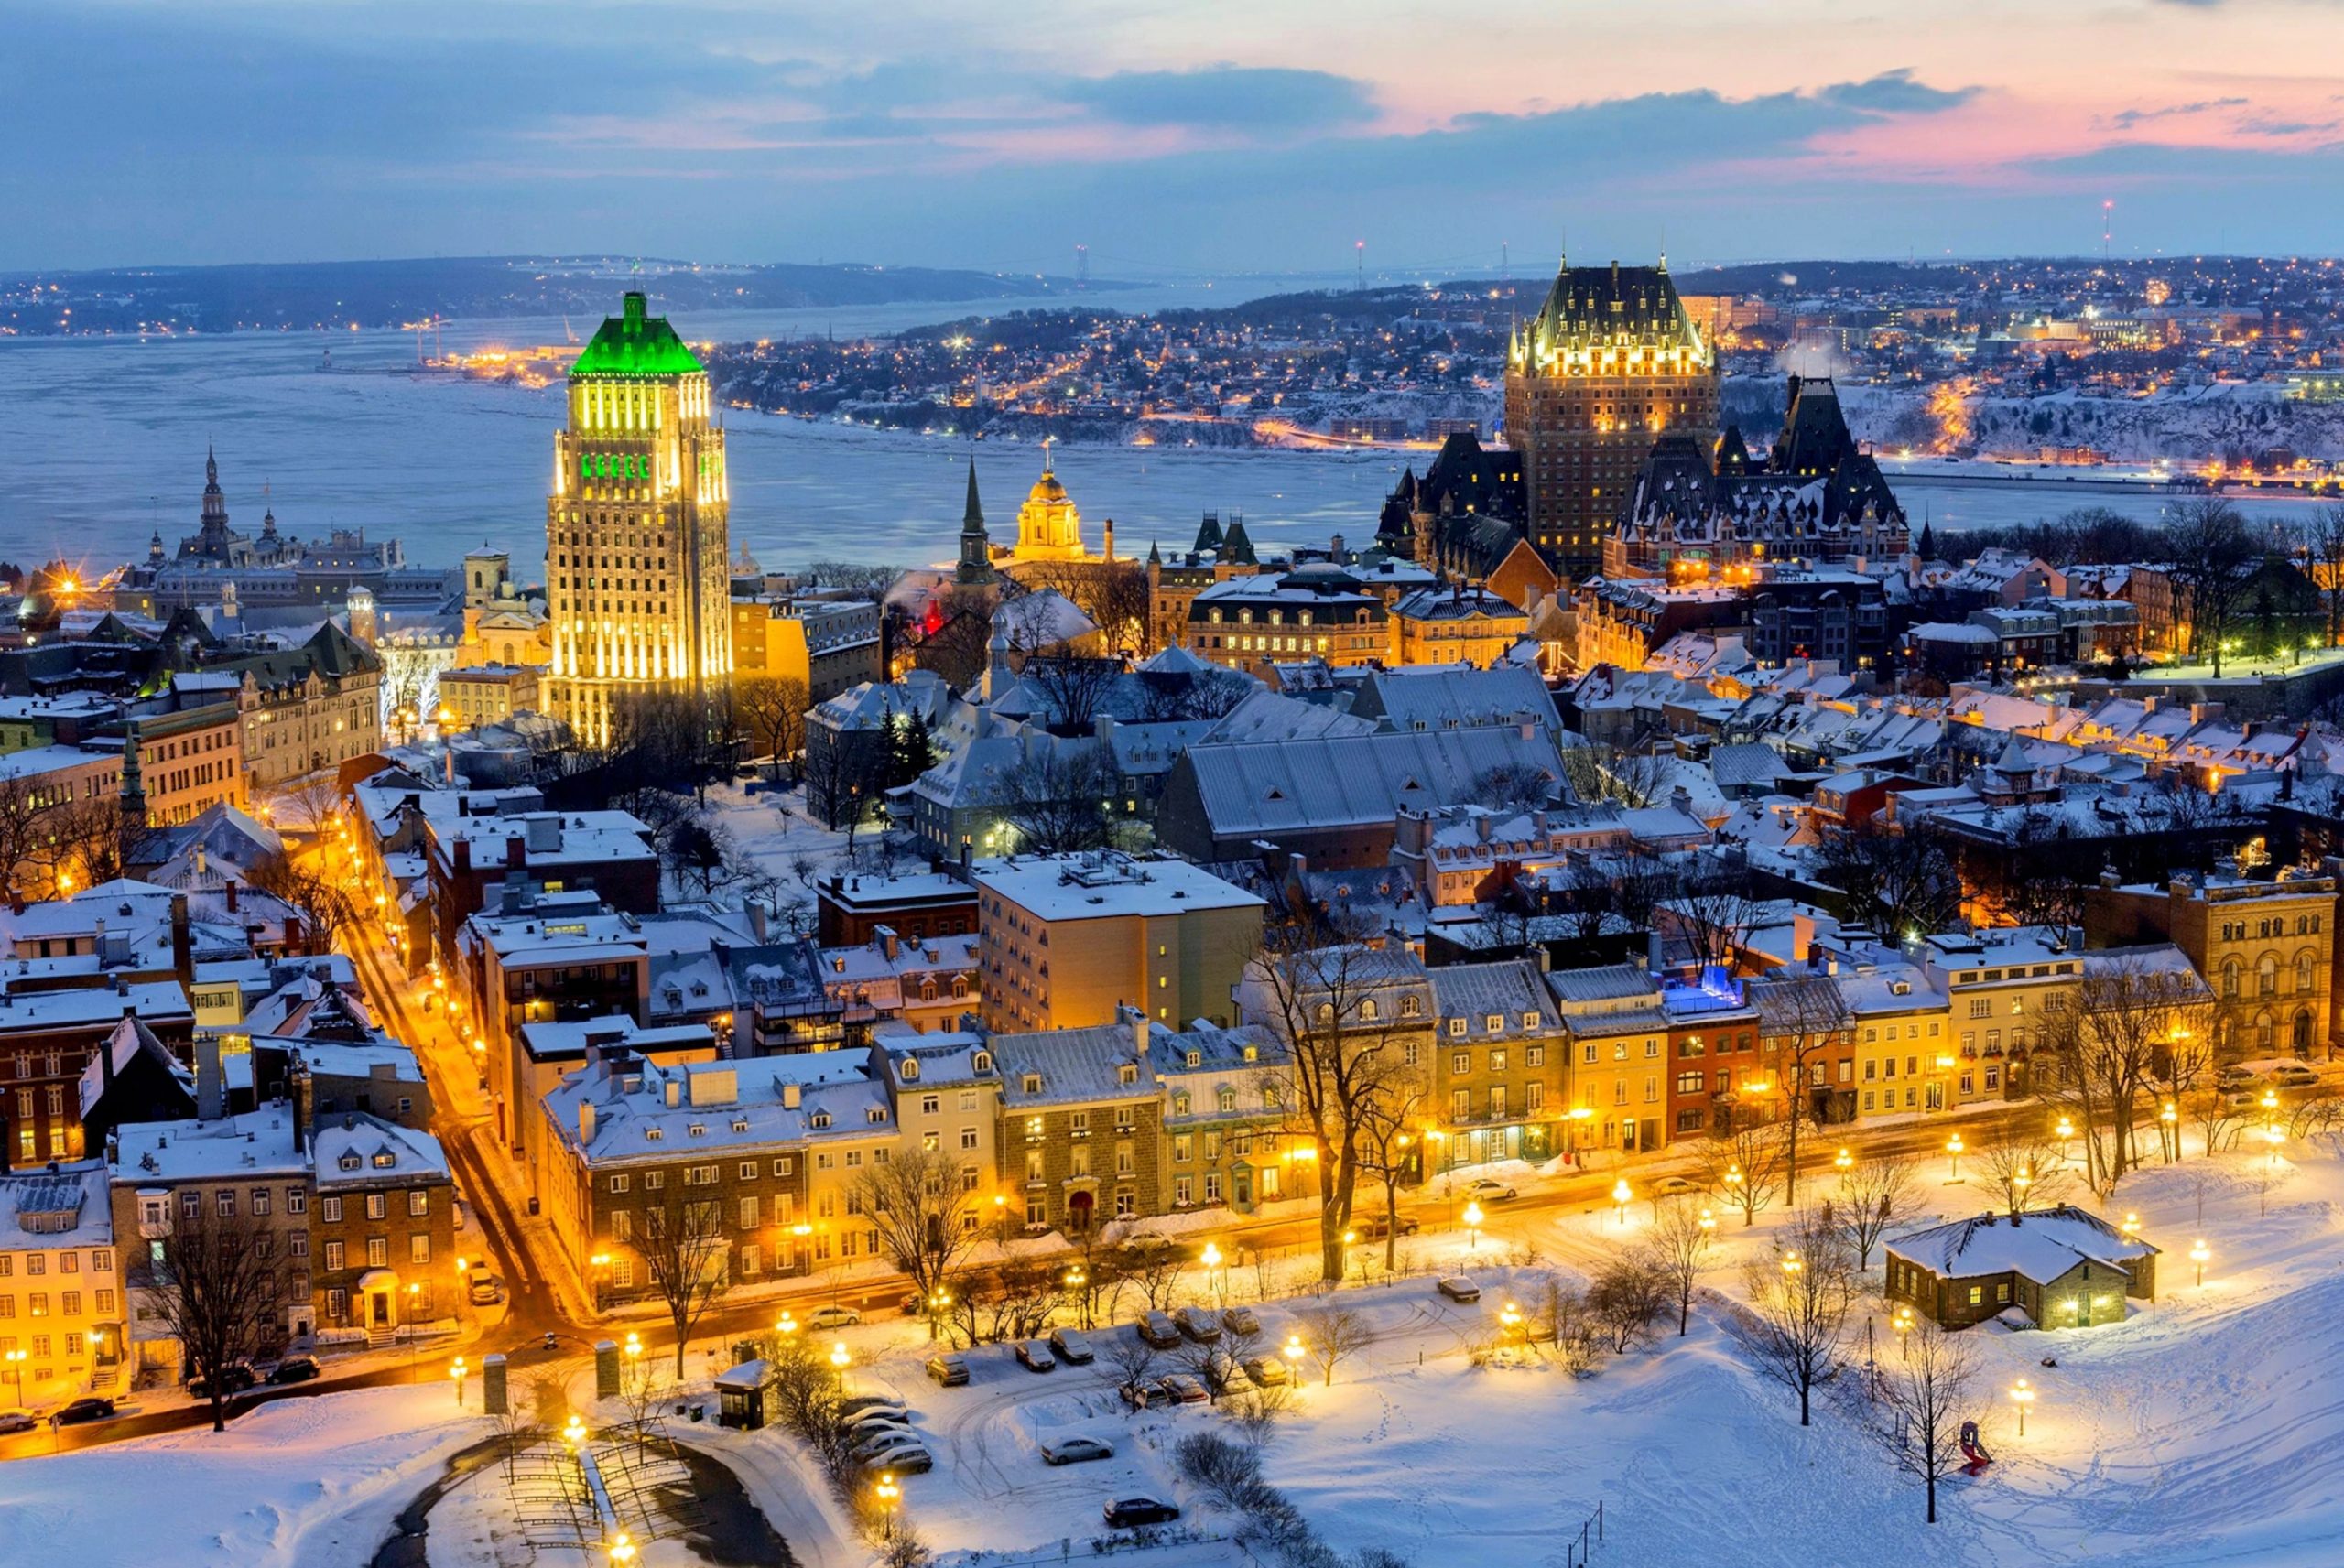 Settle and Invest in Quebec